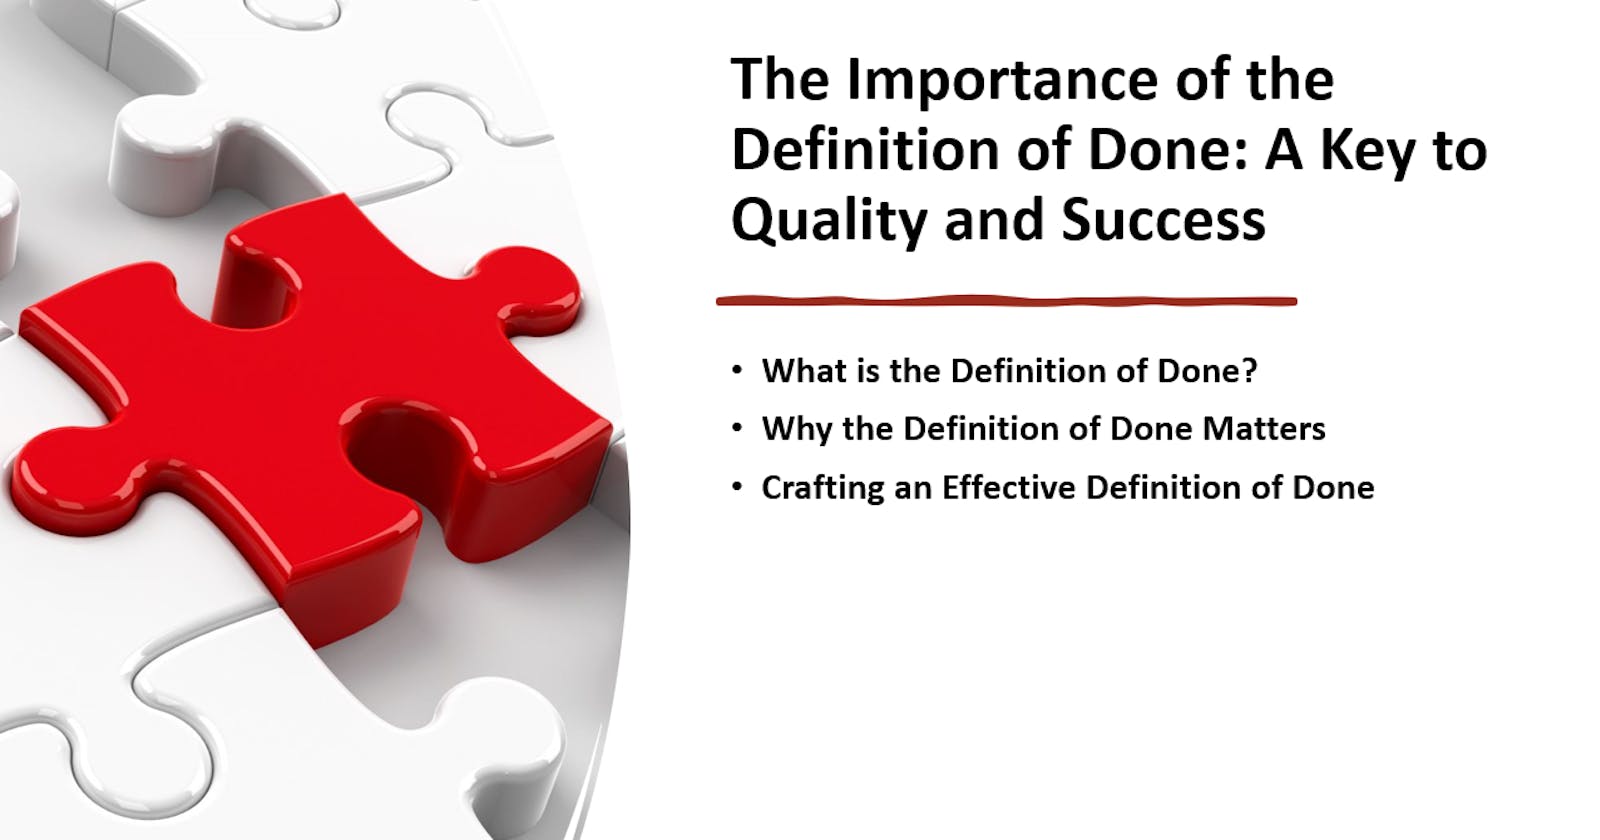 The Importance of the Definition of Done: A Key to Quality and Success